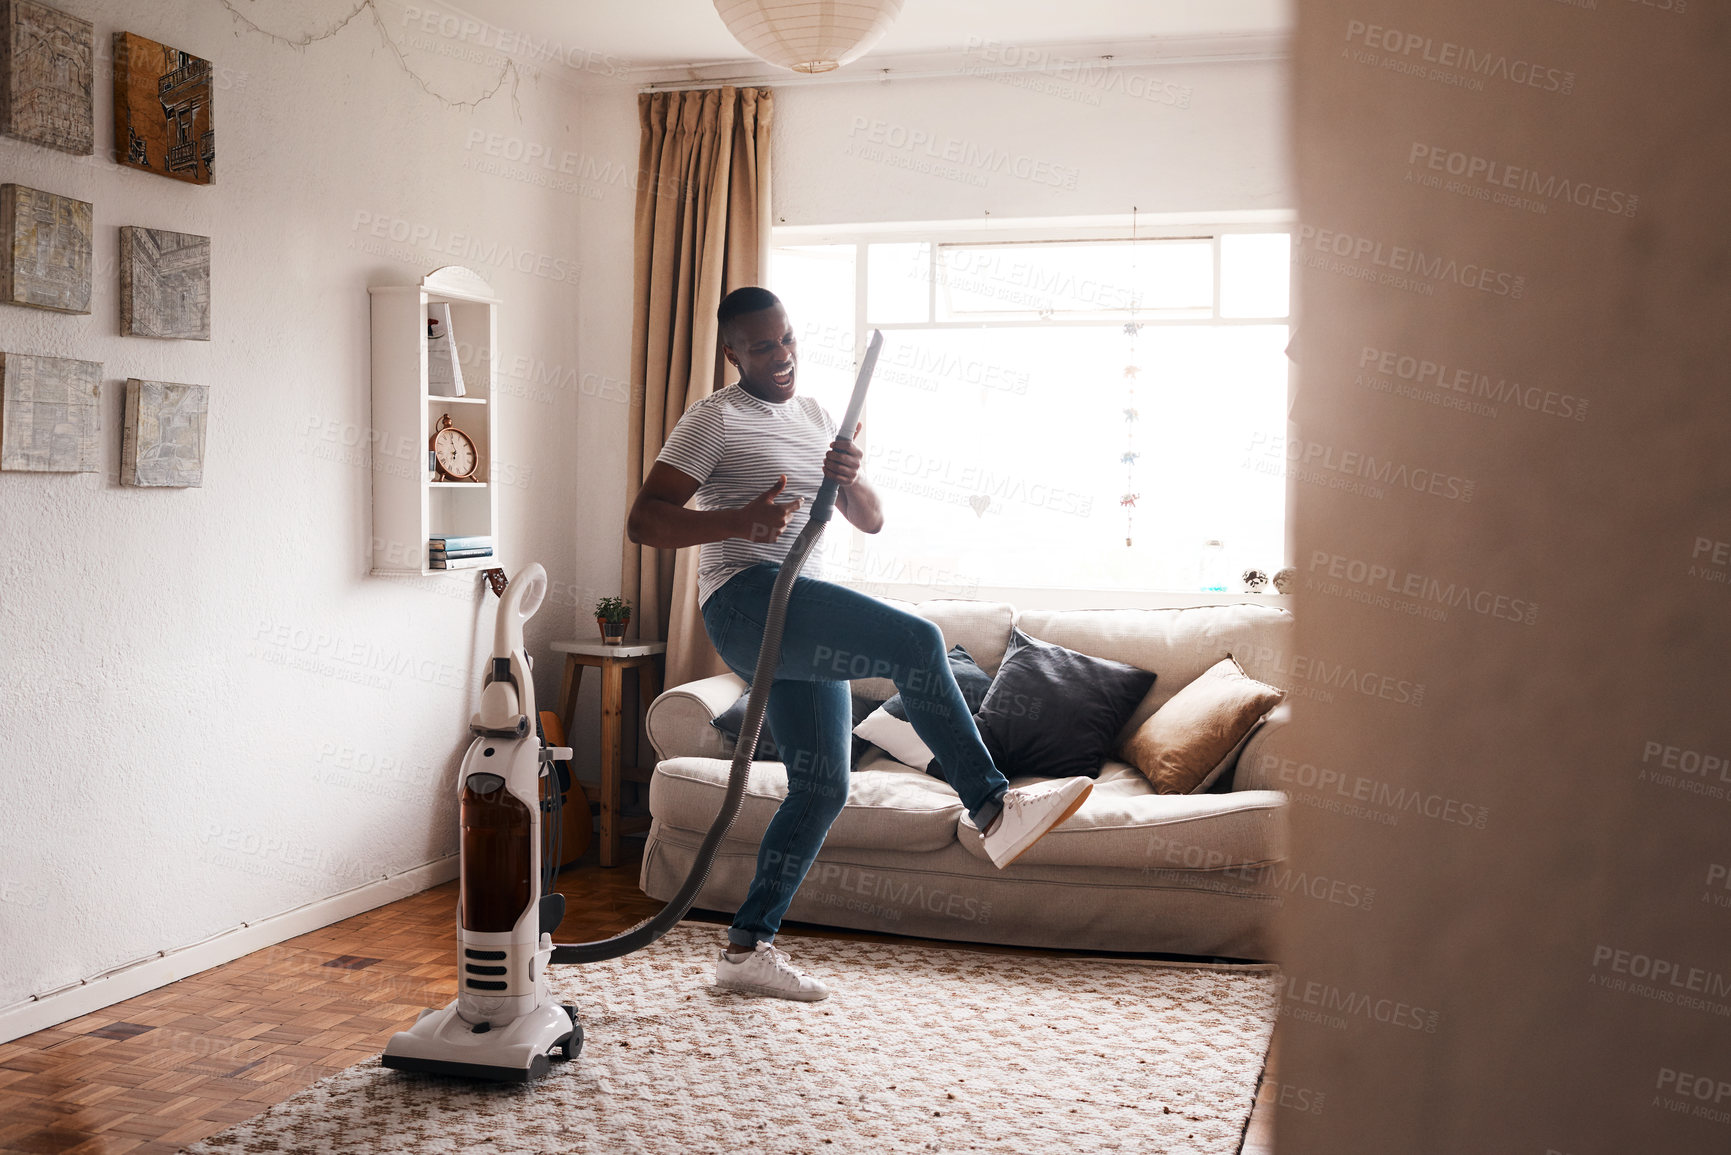 Buy stock photo Shot of a young man dancing while busy vacuuming the living room